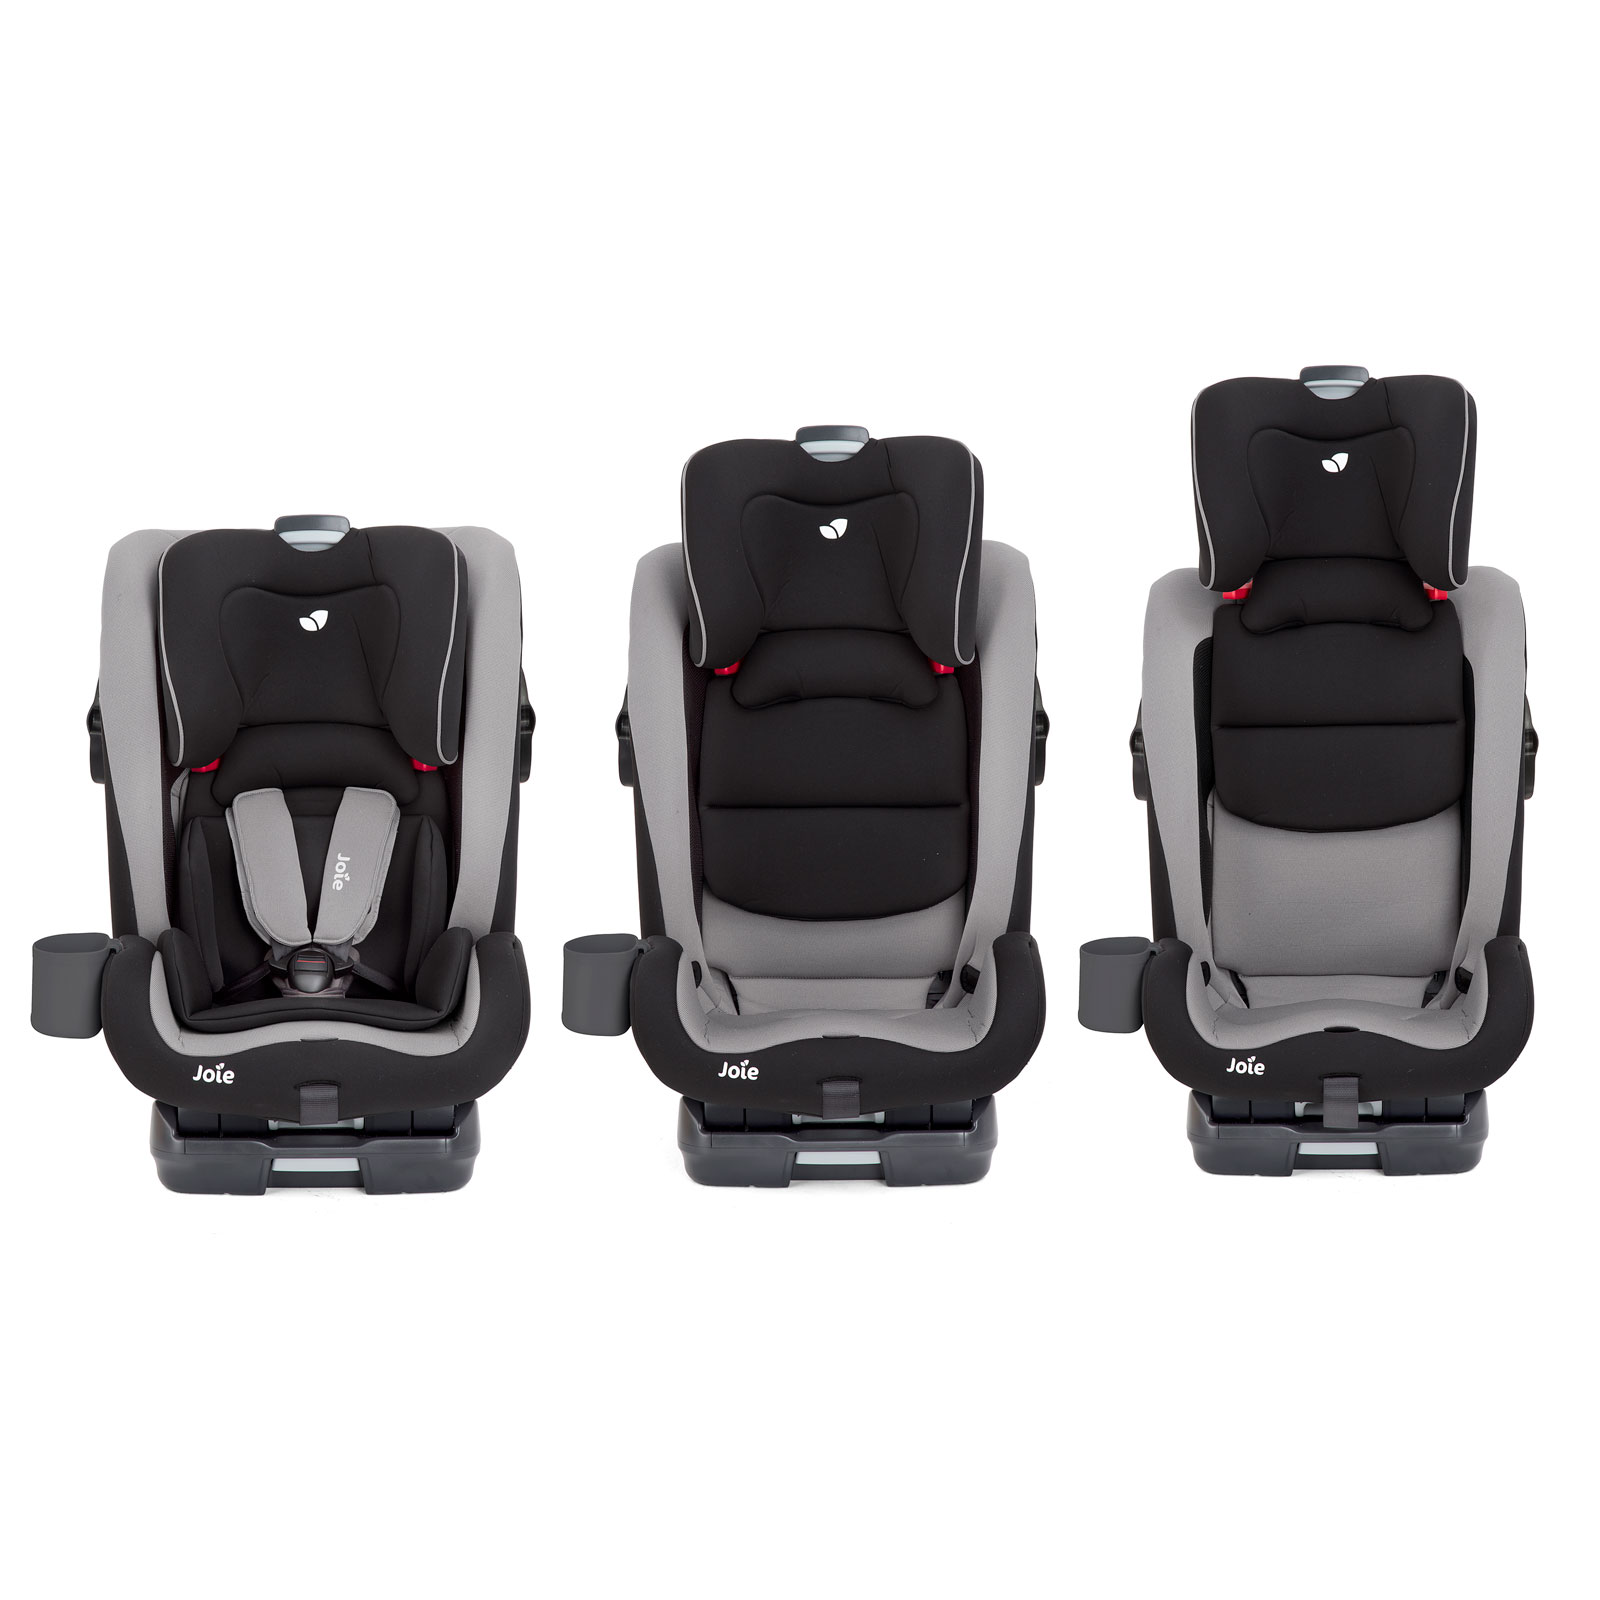 Joie Bold Group 1/2/3 car seat - Car seats from 9 months - Car seats